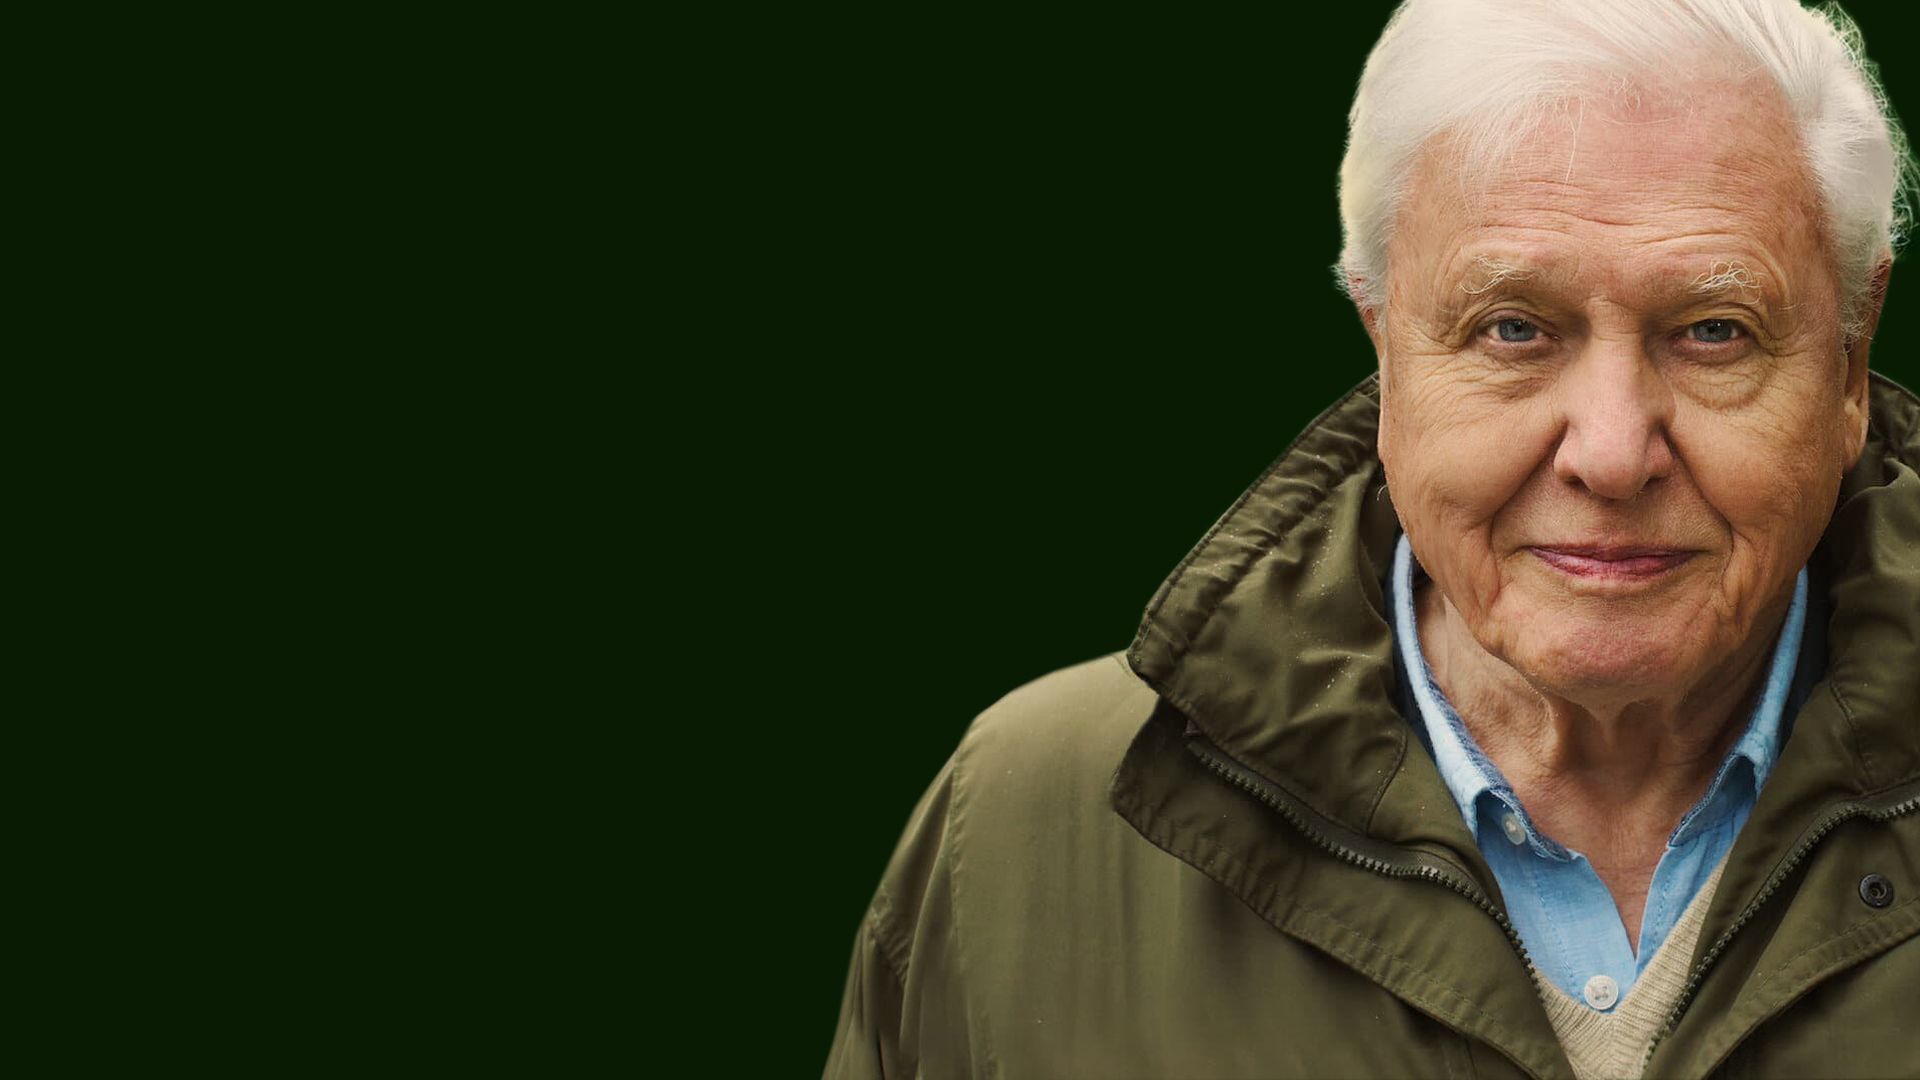 David Attenborough: A Life on Our Planet background